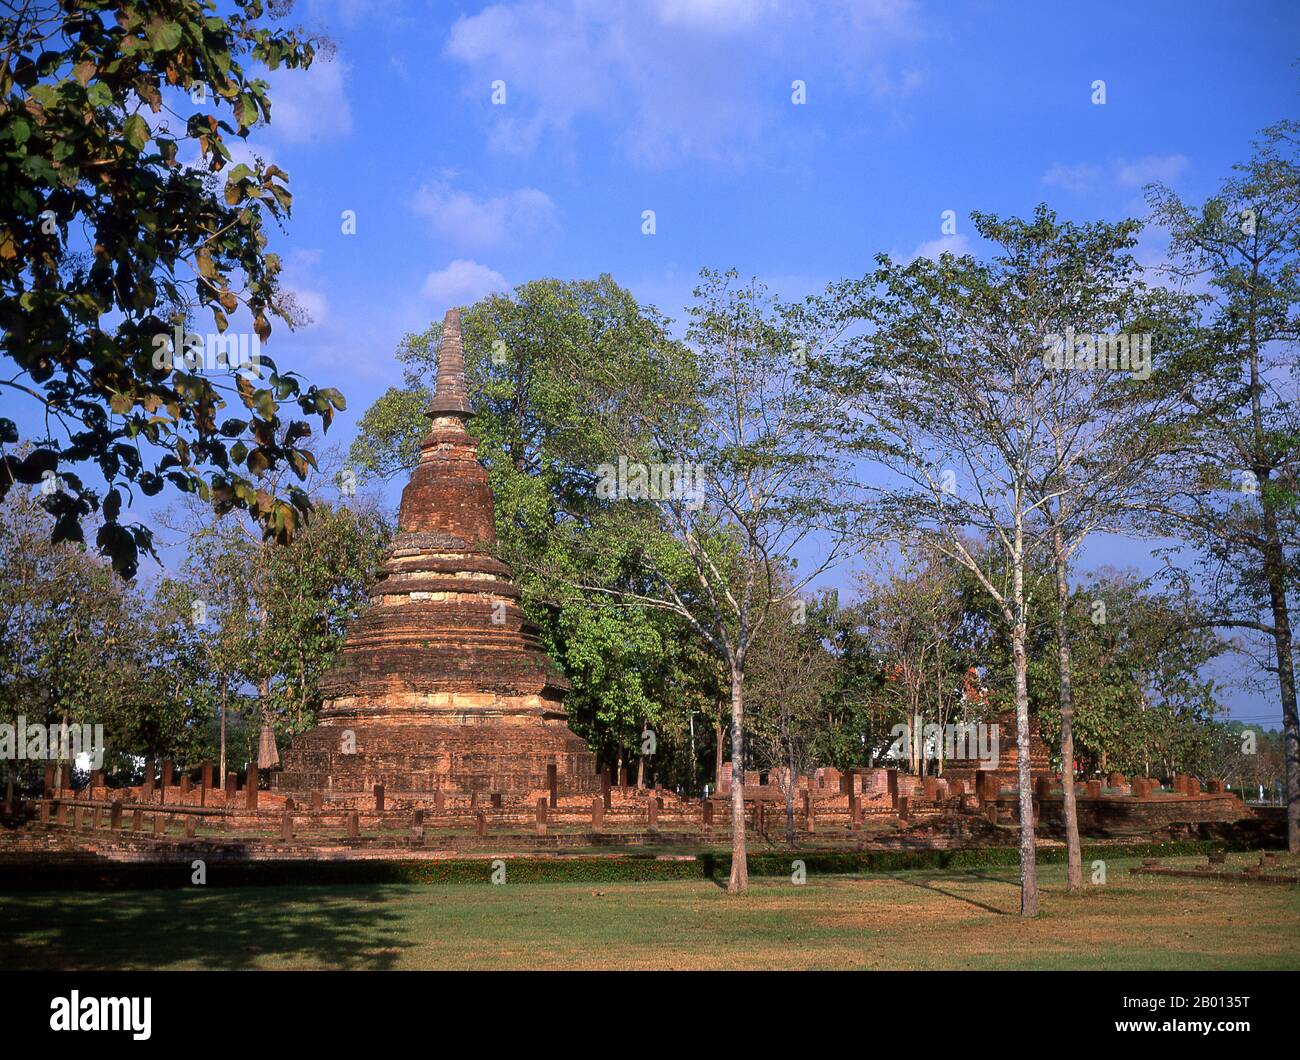 Thailand: Wat Phra That, Kamphaeng Phet Historical Park.  Kamphaeng Phet Historical Park in central Thailand was once part of the Sukhothai Kingdom that flourished in the 13th and 14th century CE. The Sukhothai Kingdom was the first of the Thai kingdoms. Stock Photo